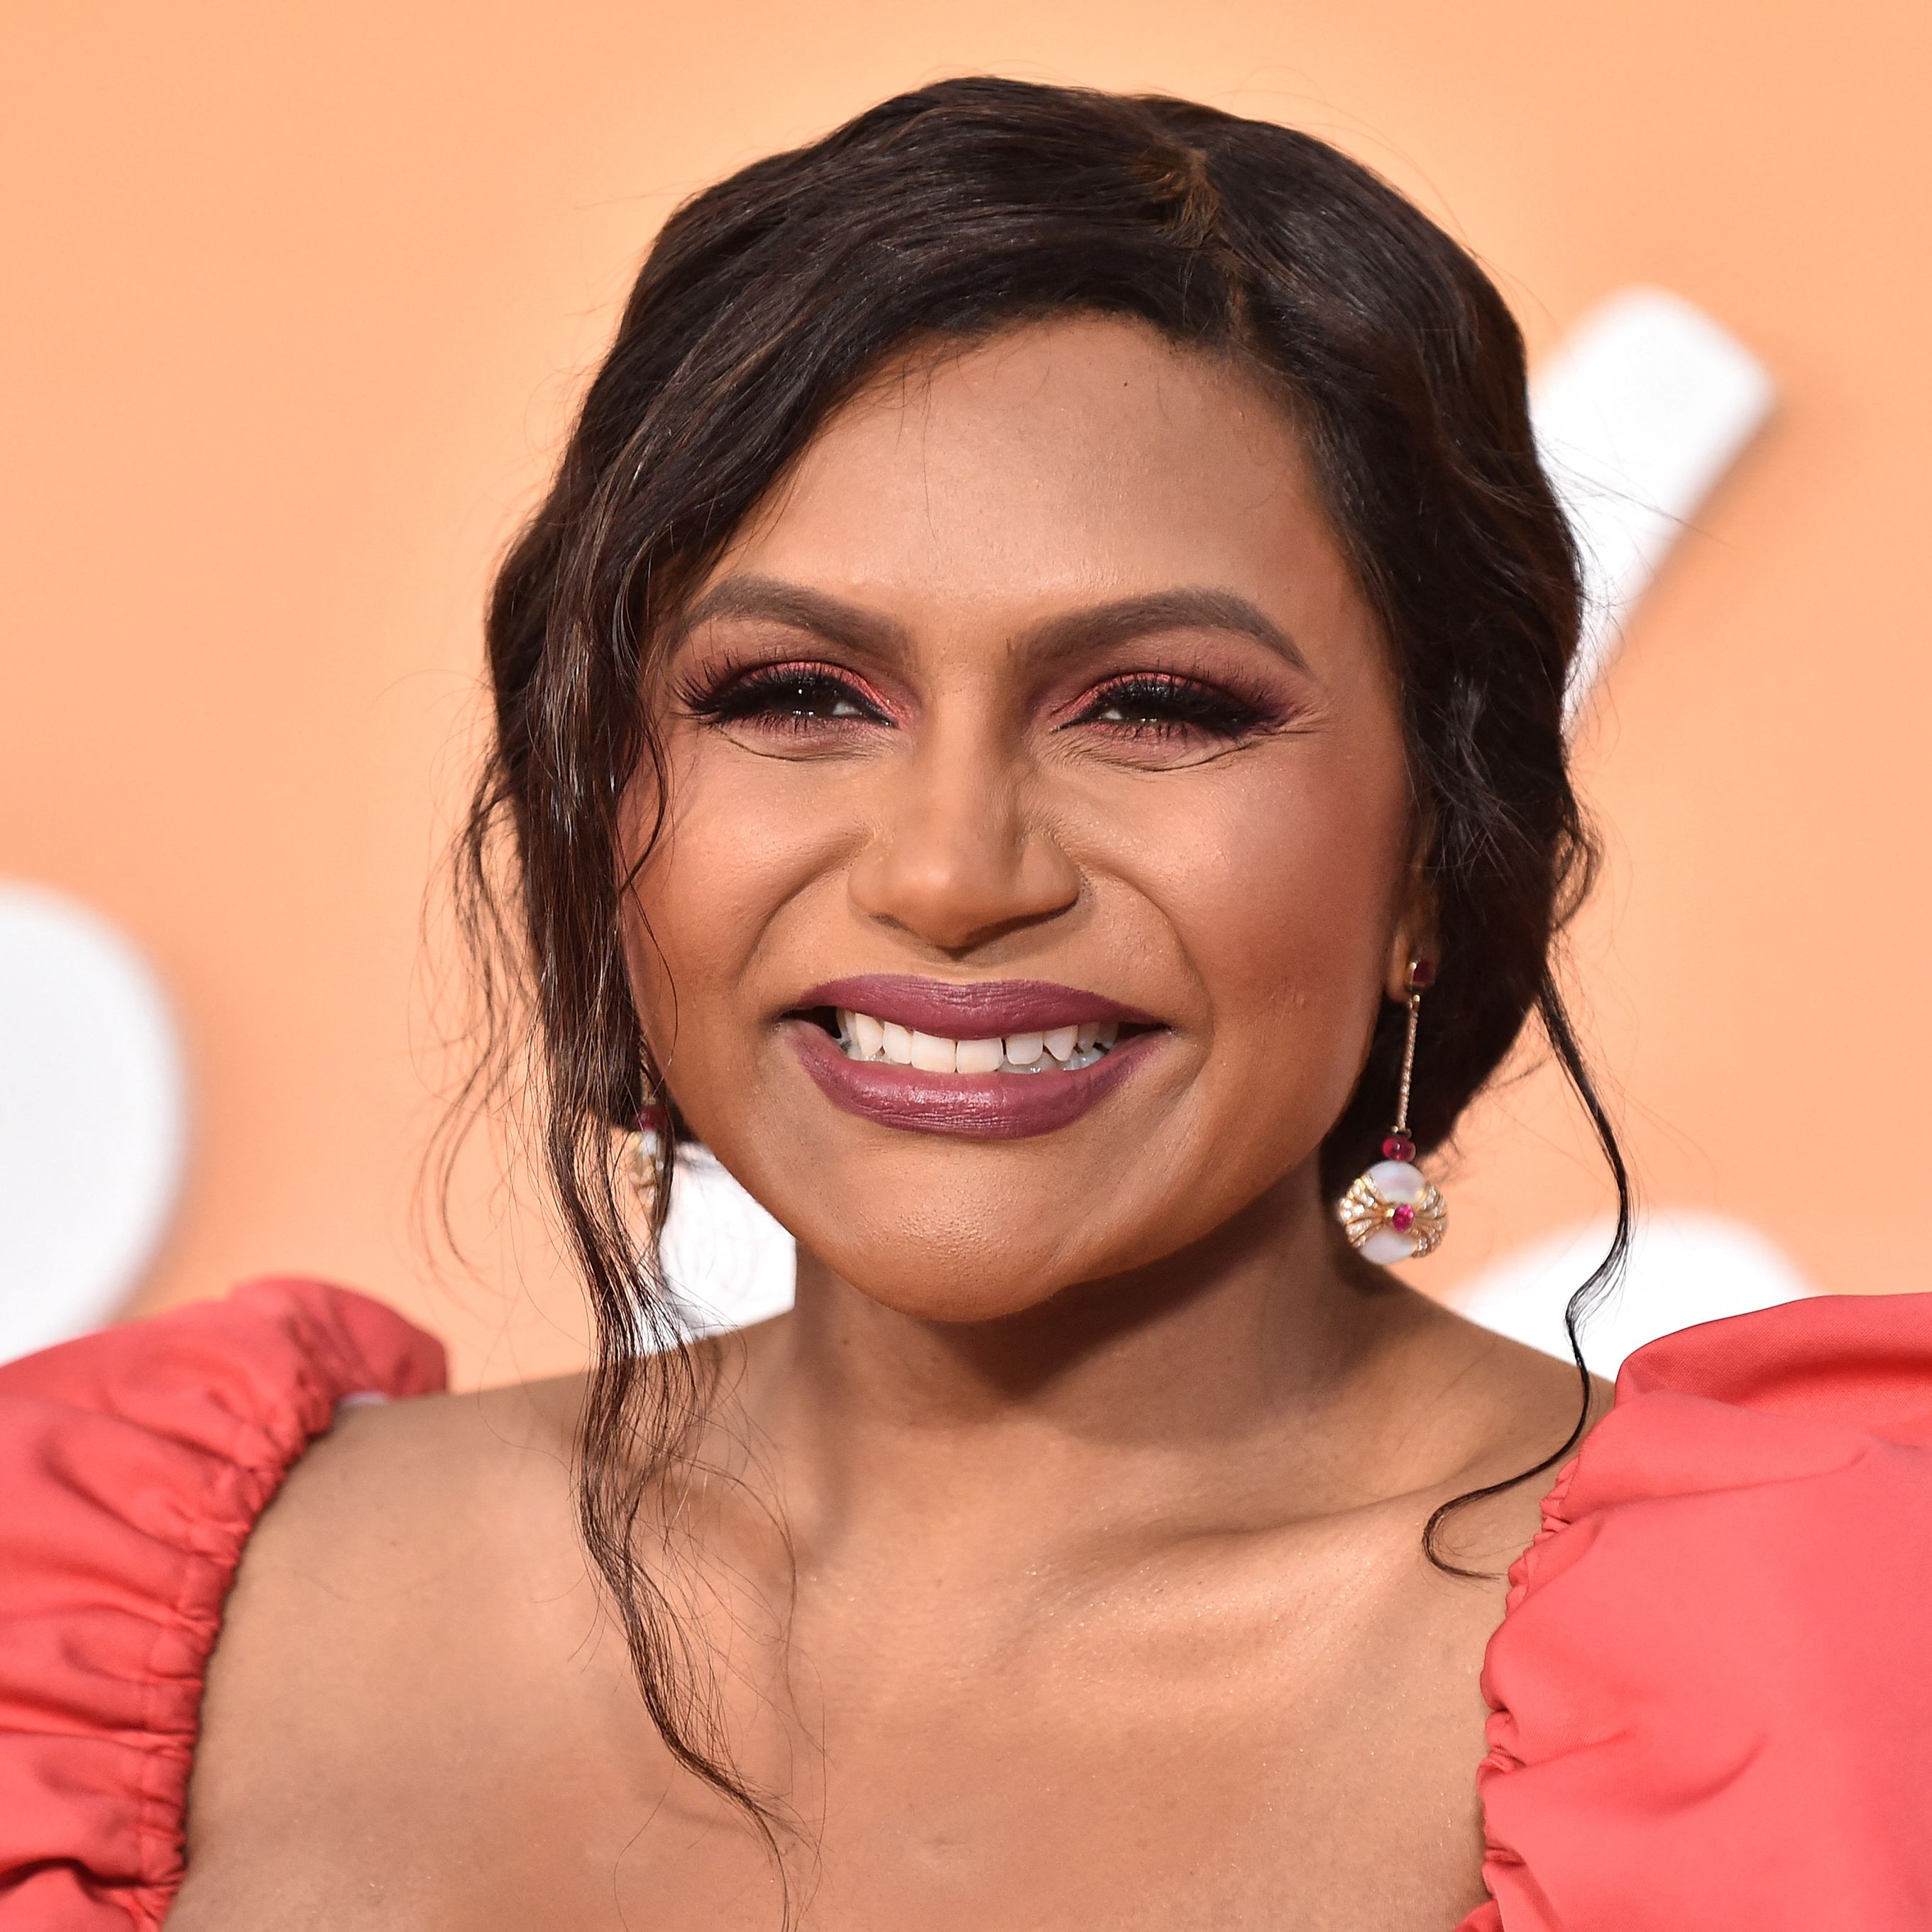 Mindy Kaling Is Making Over $8 Million Per Year and Her Net Worth Is Massive